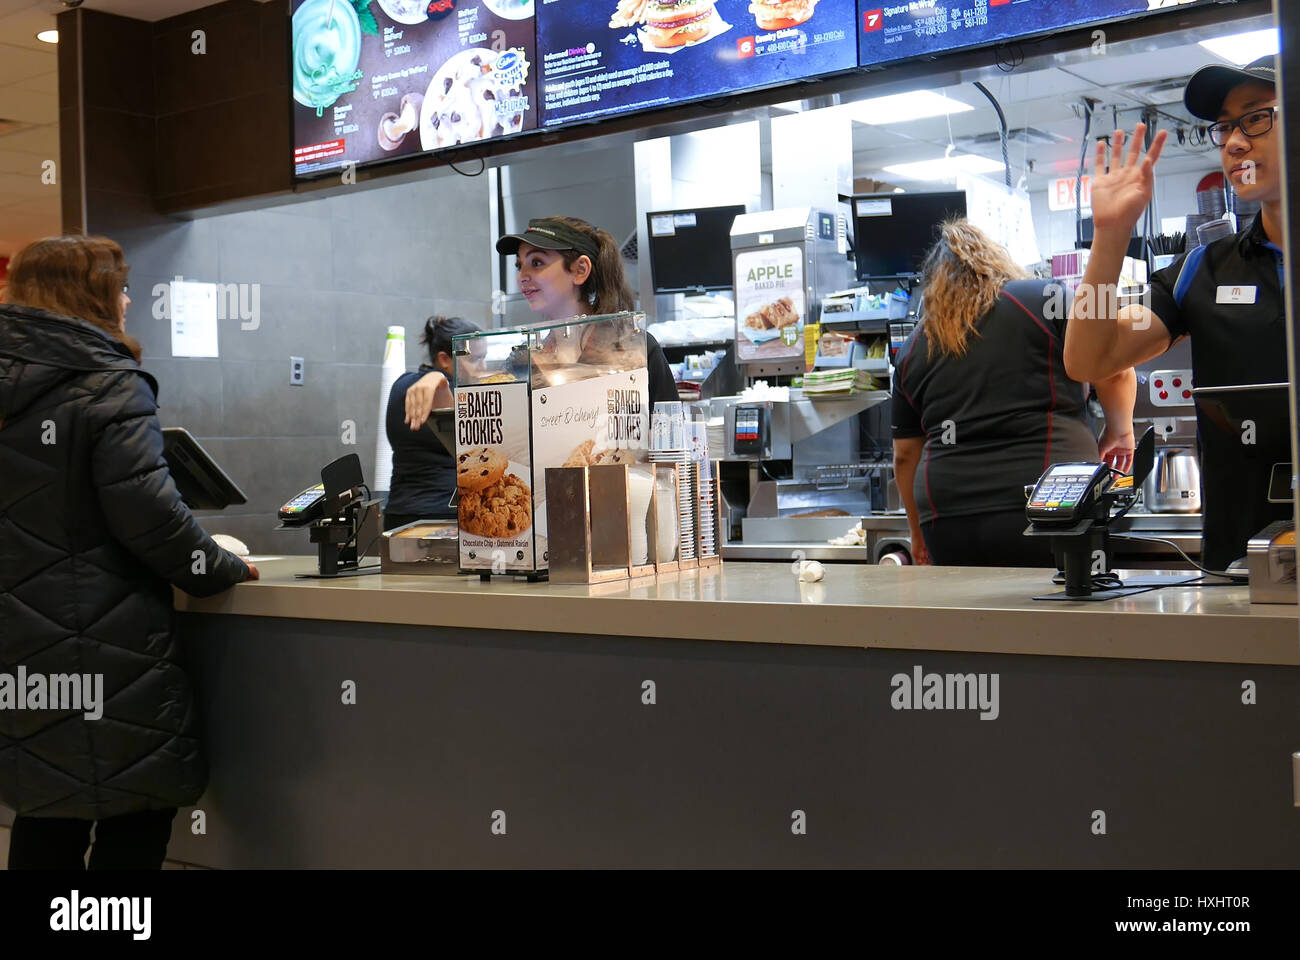 Coquitlam, BC, Canada - February 28, 2017 : Motion of worker waving for next on line customer at mcdonalds check out counter inside Coquitlam shopping Stock Photo